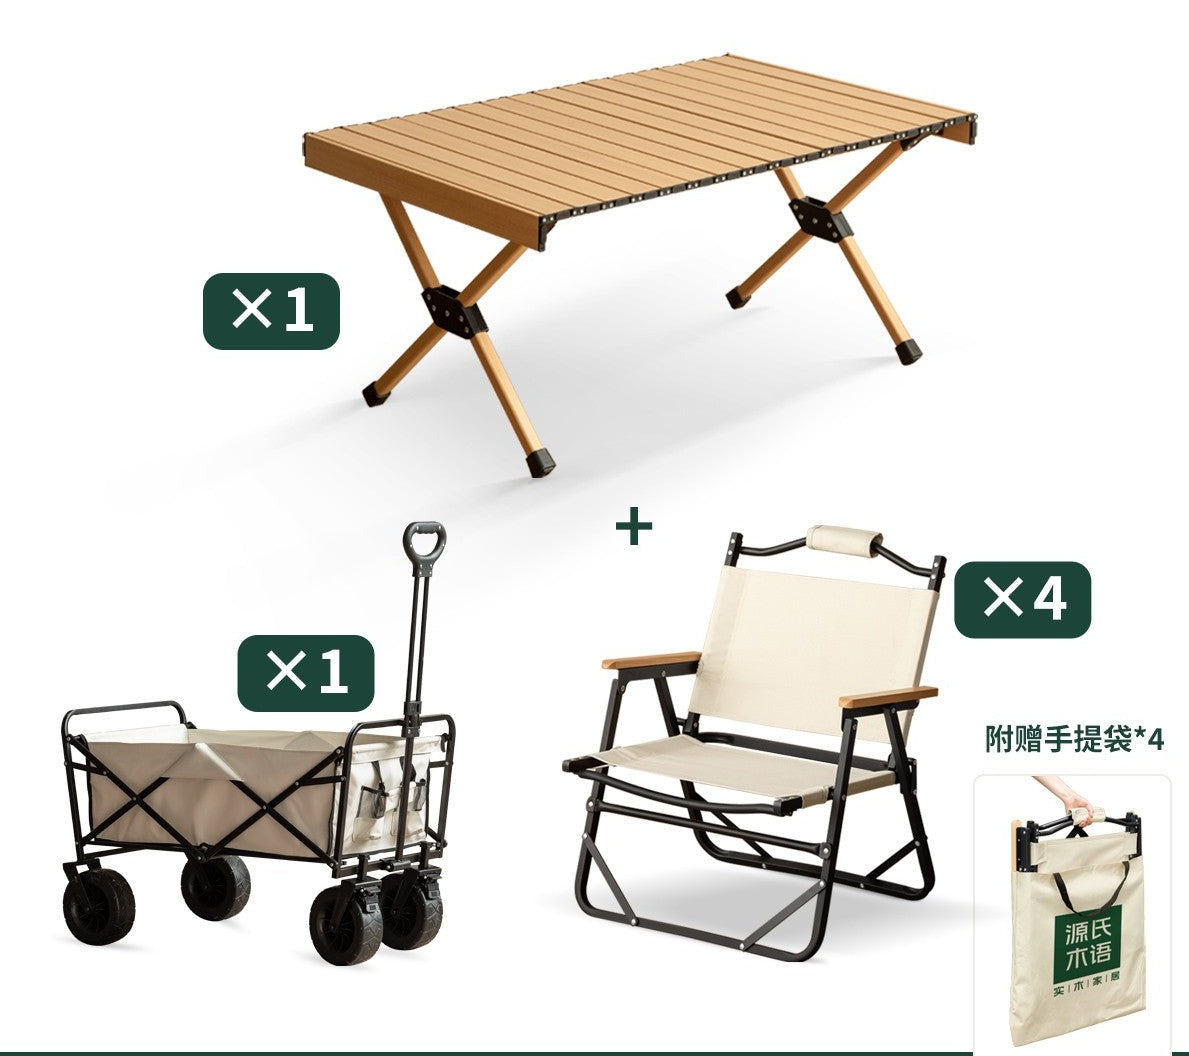 Aluminum alloy folding portable egg roll table table outdoor camping equipment  and chair set